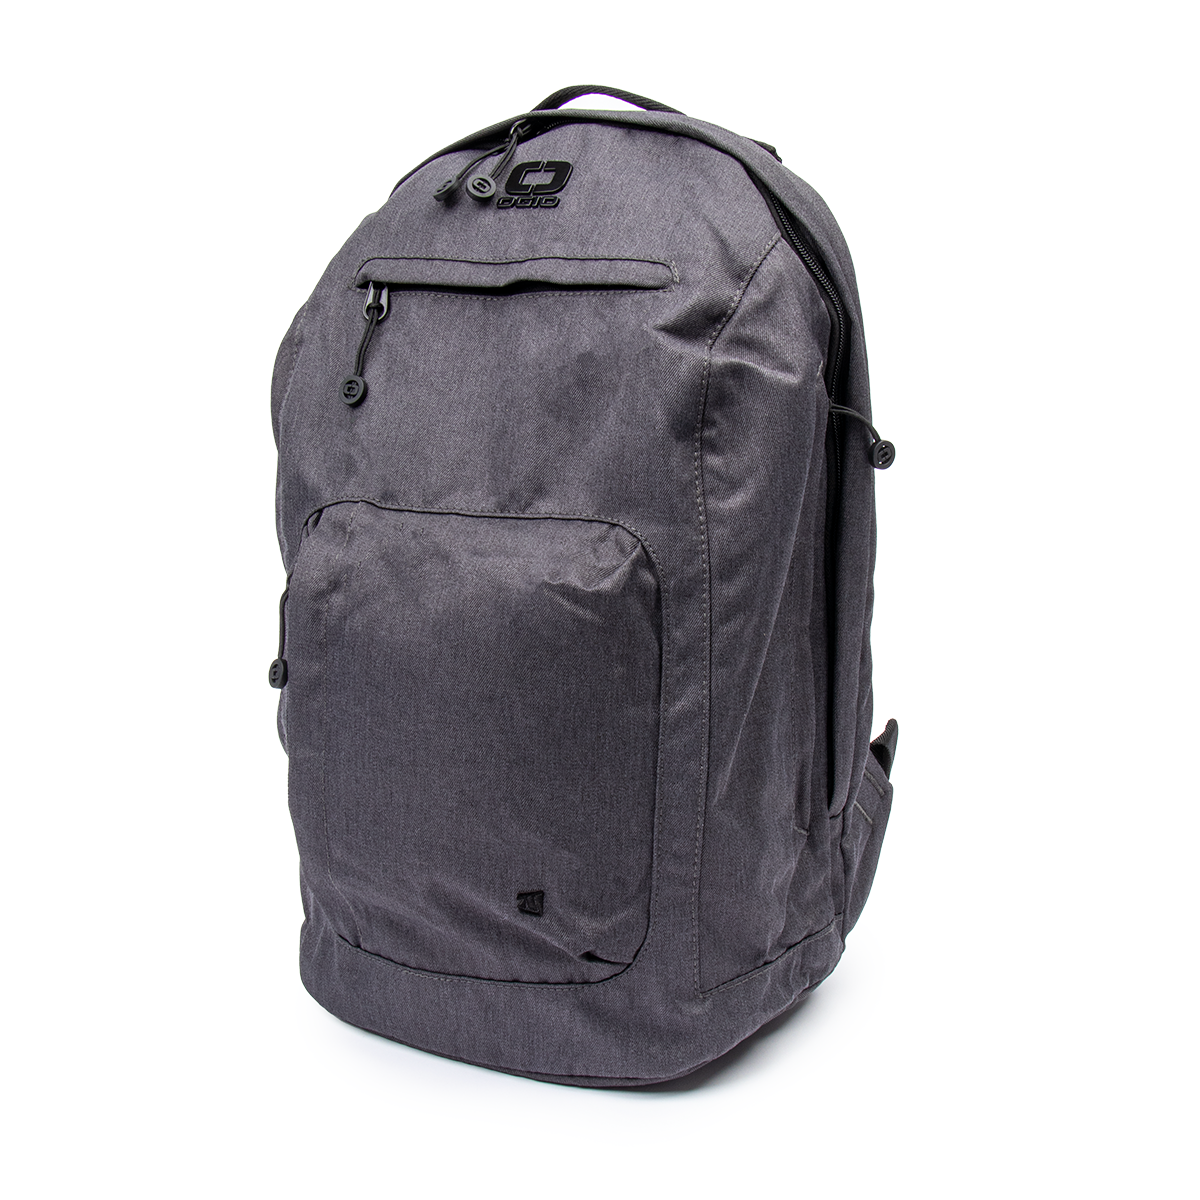 Ogio Downtown Backpack